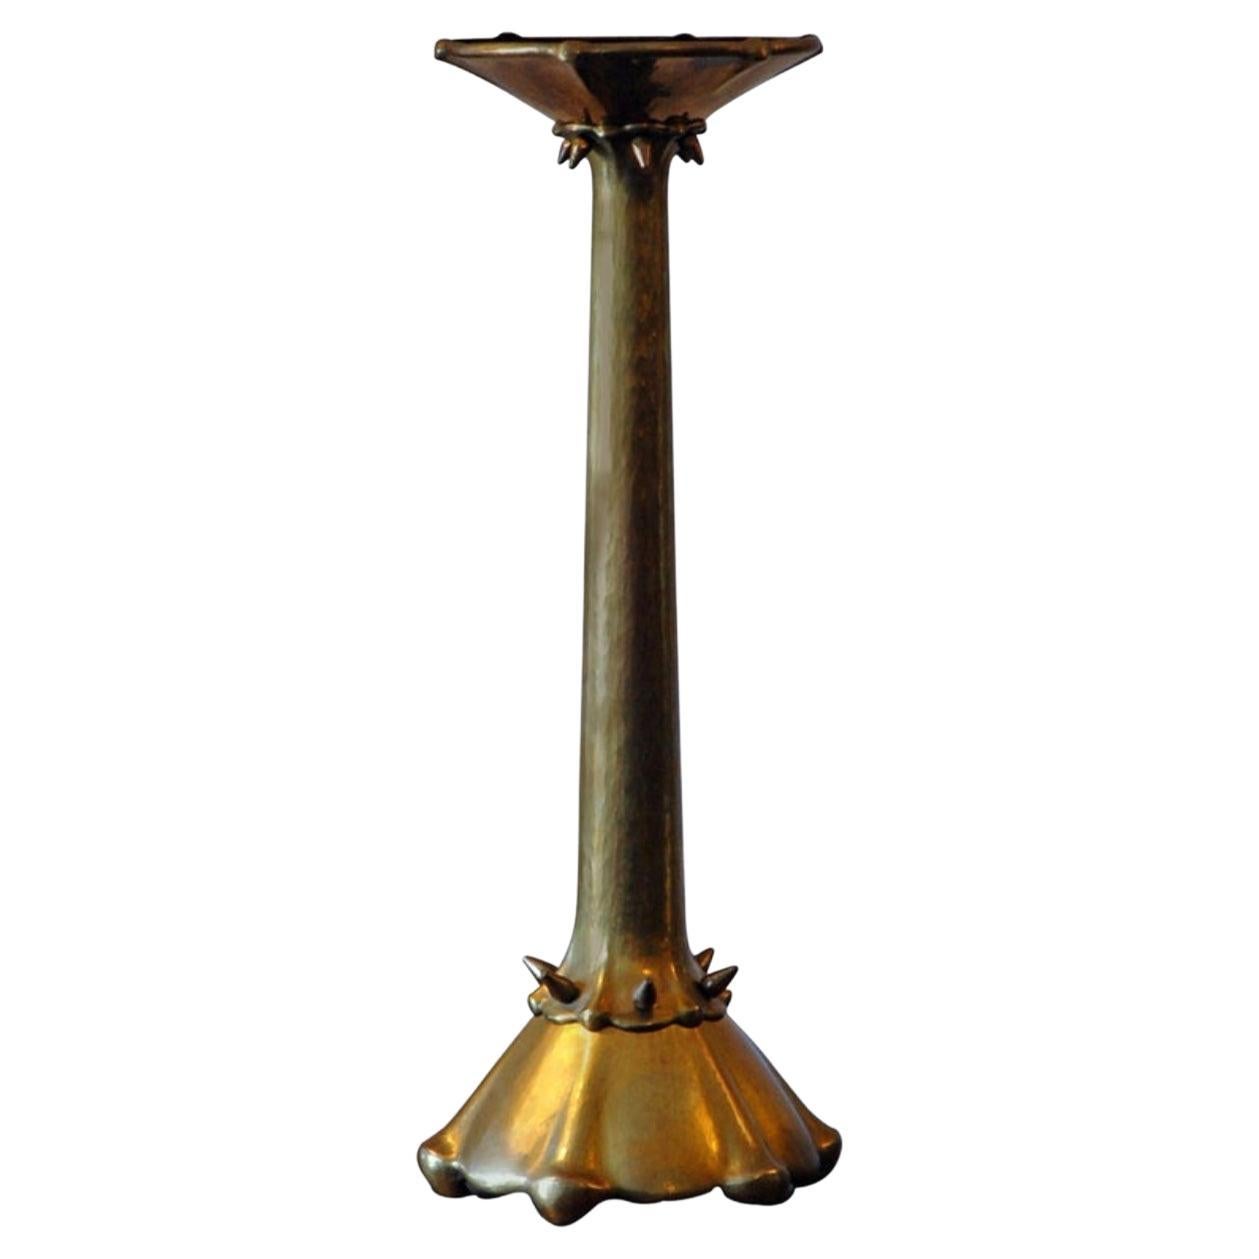 Rare Amsterdam School Hammered Brass Candlestick For Sale